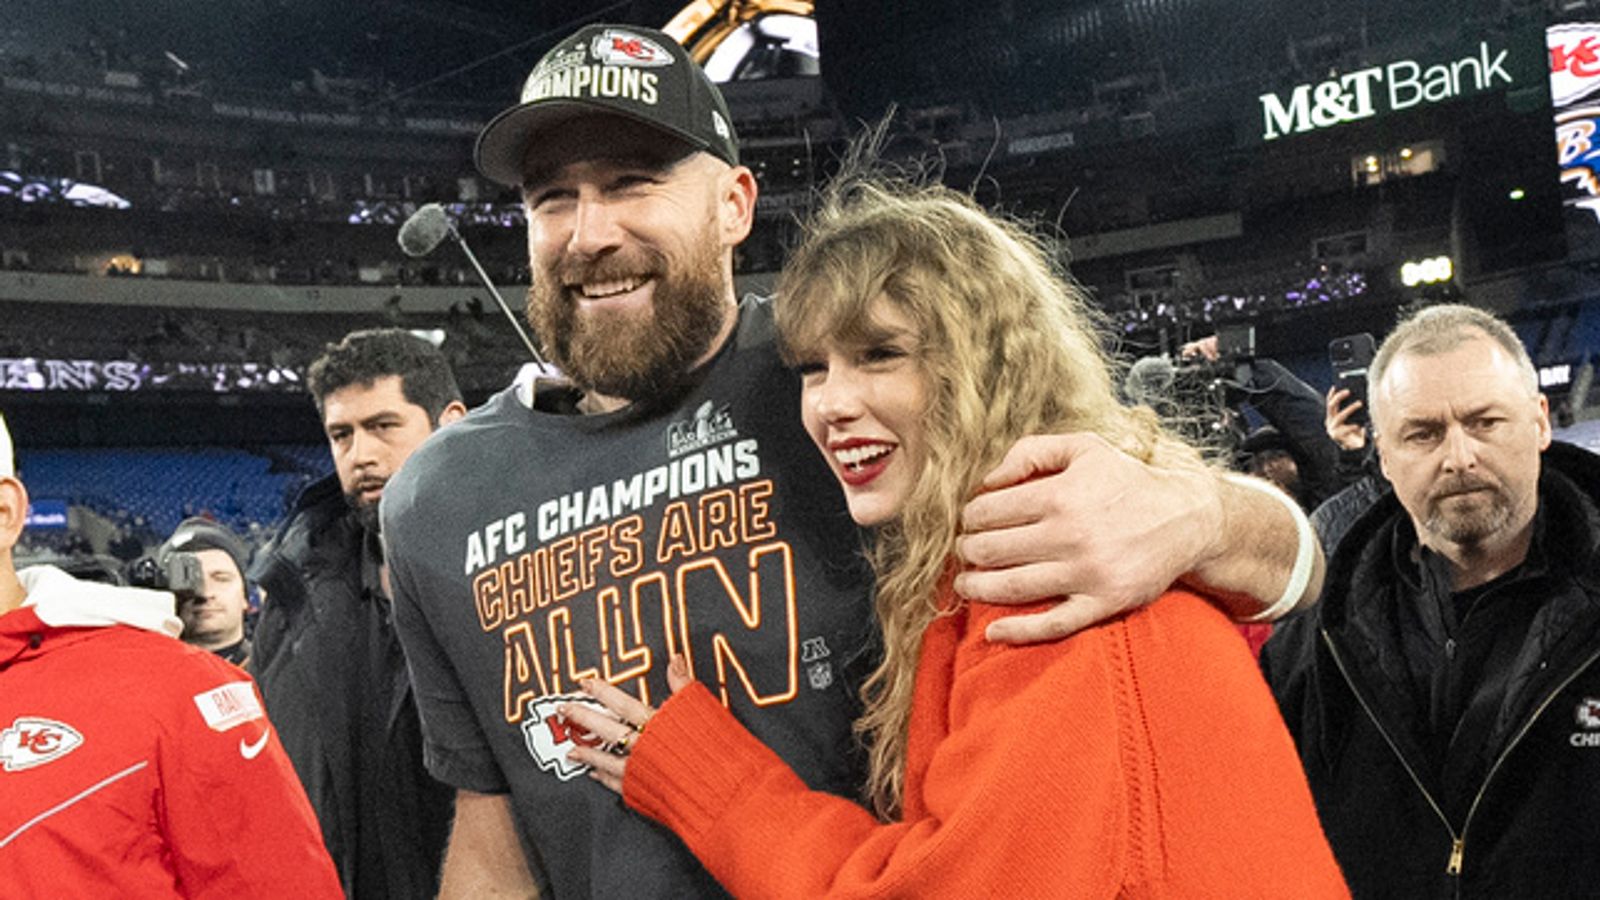 Taylor Swift donates 0,000 to family of woman killed in Kansas City Chiefs' Super Bowl celebrations